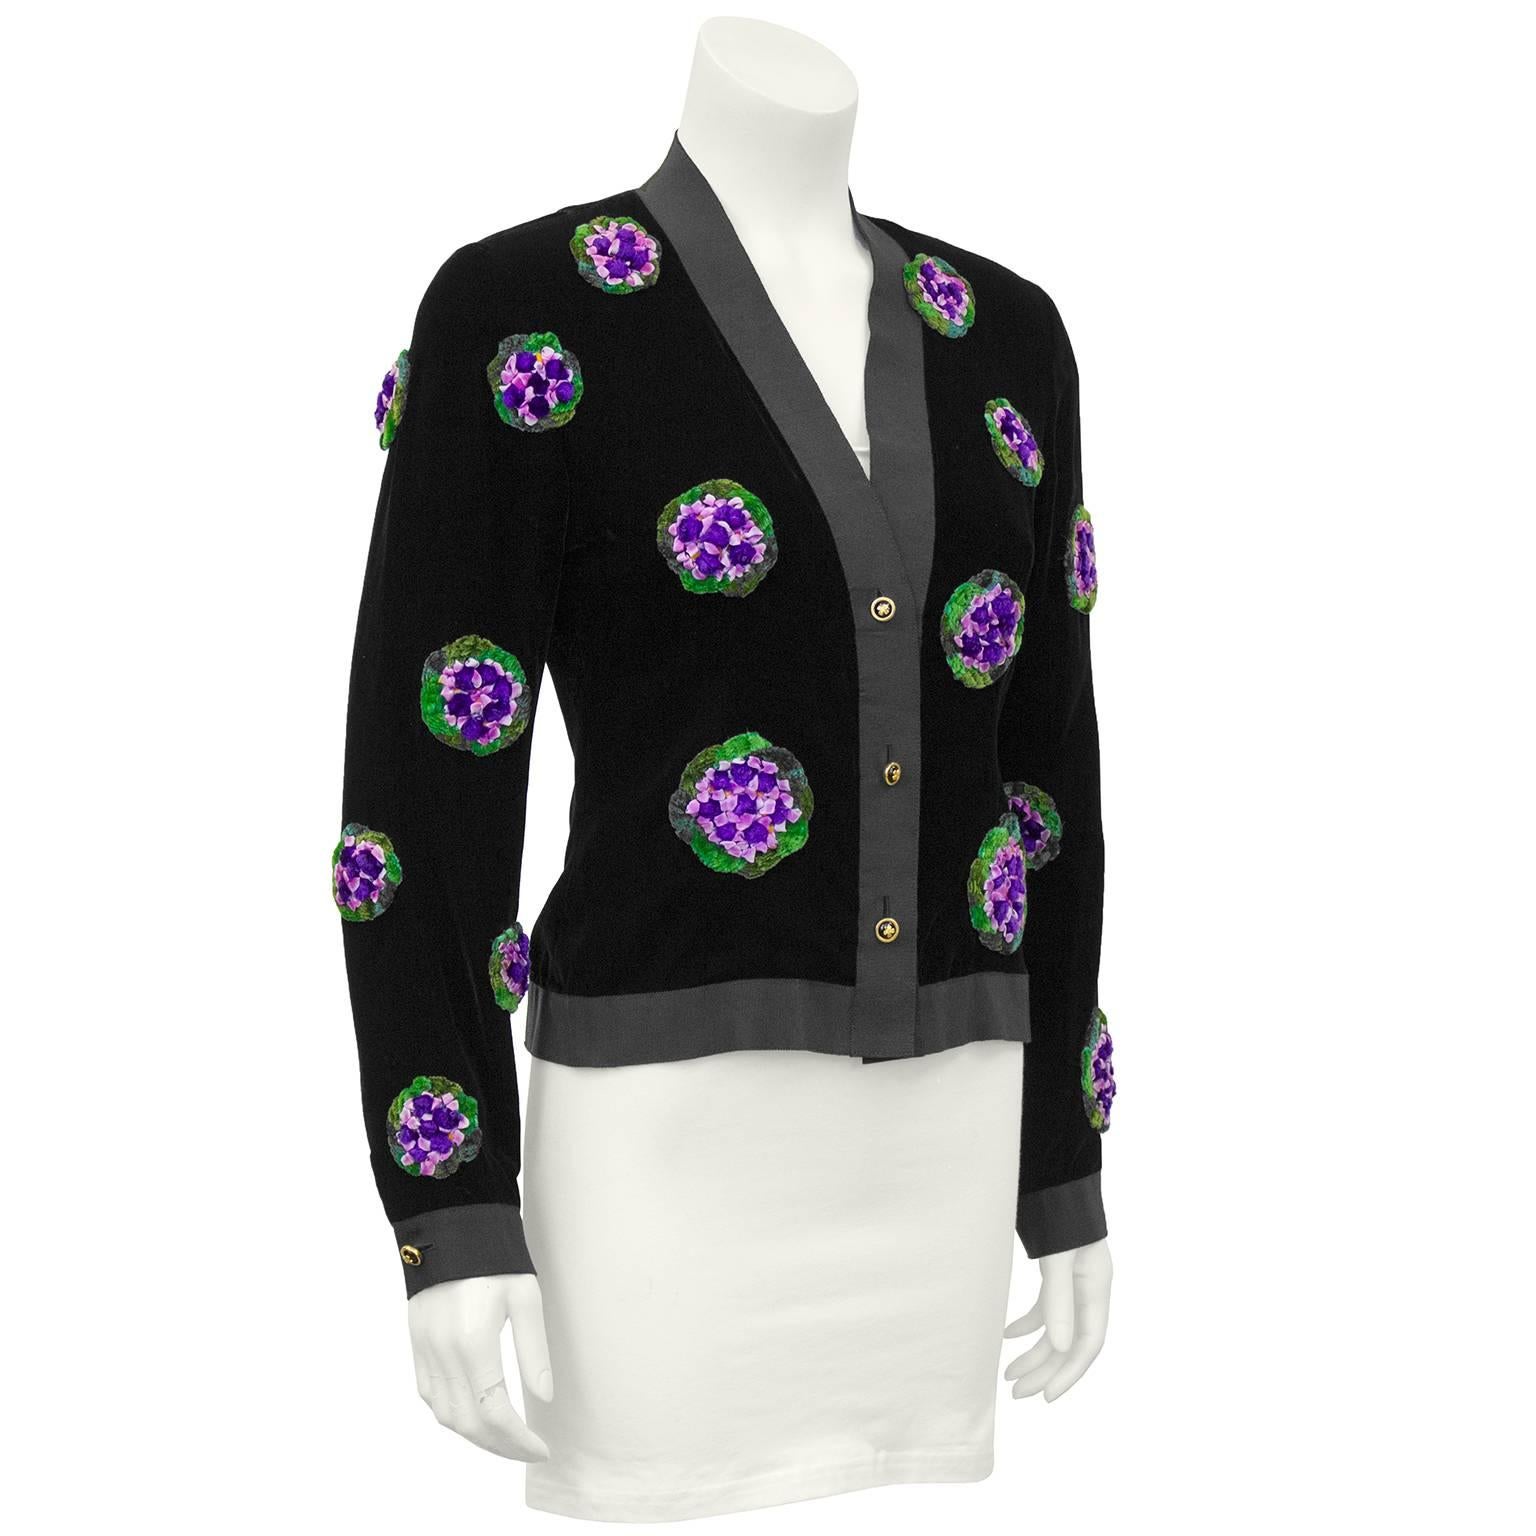 1990s Chanel jet black velvet cardigan featuring black grosgrain ribbon trim, 3D purple and green floral appliques and gold Chanel logo buttons. Great seasonally transitional piece. Excellent vintage condition, fits like a US 6. 

Sleeve 21"